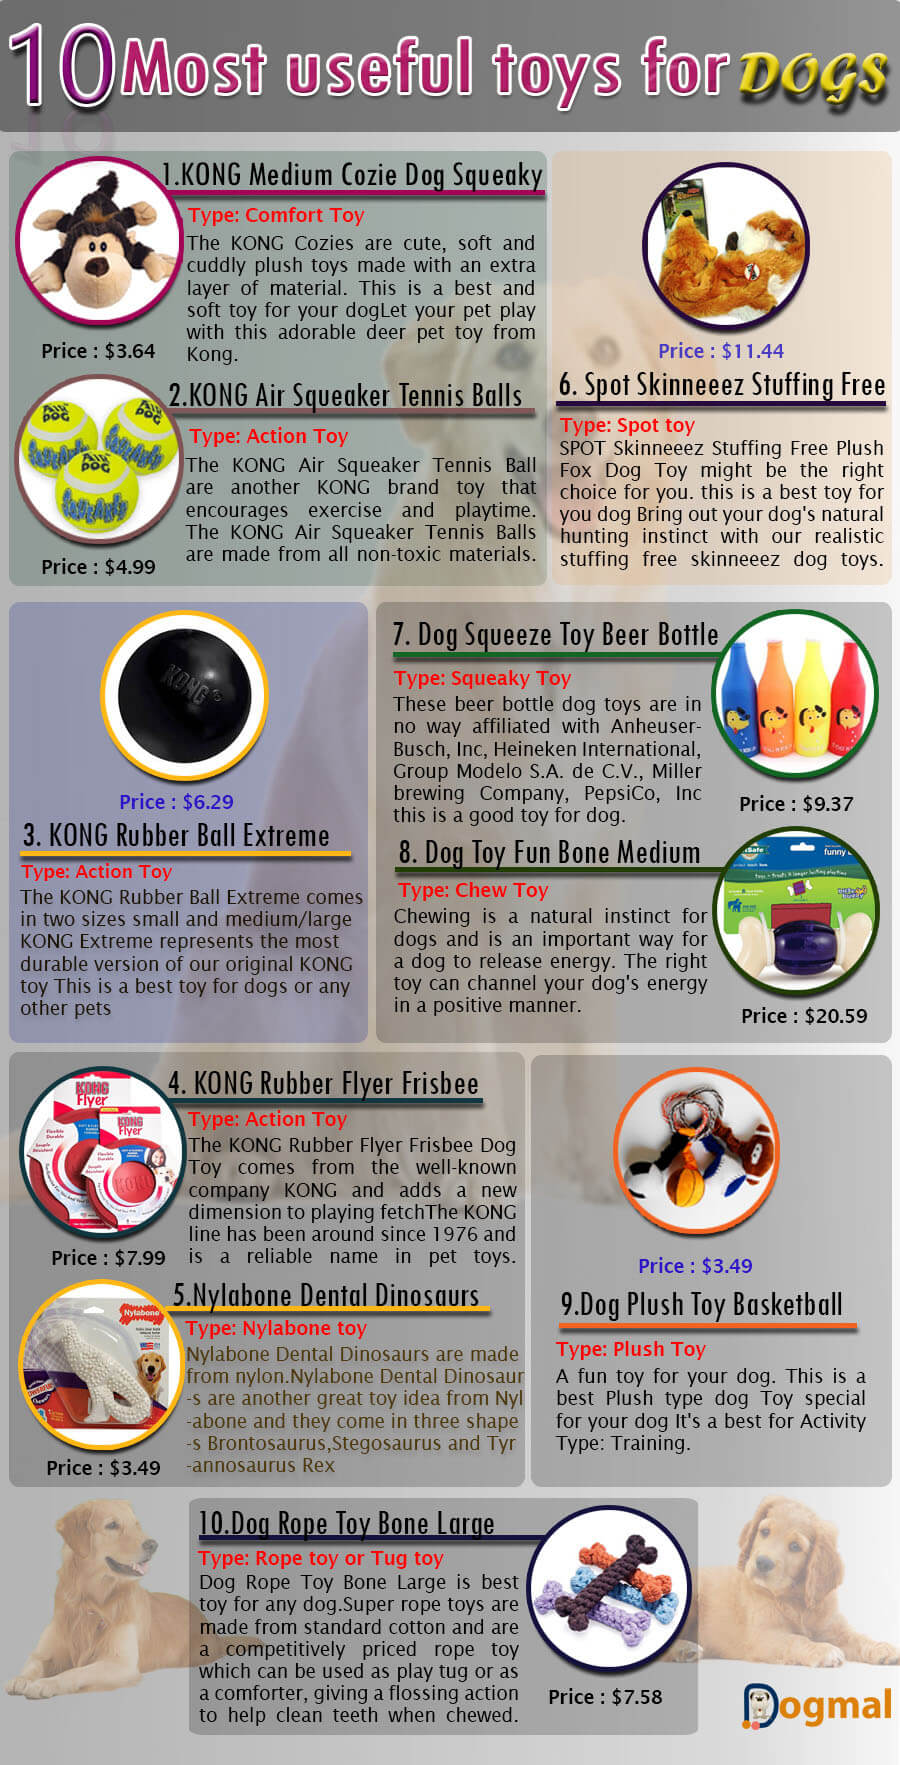 BEST DOG TOYS INFOGRAPHIC by WWW.DOGMAL.COM